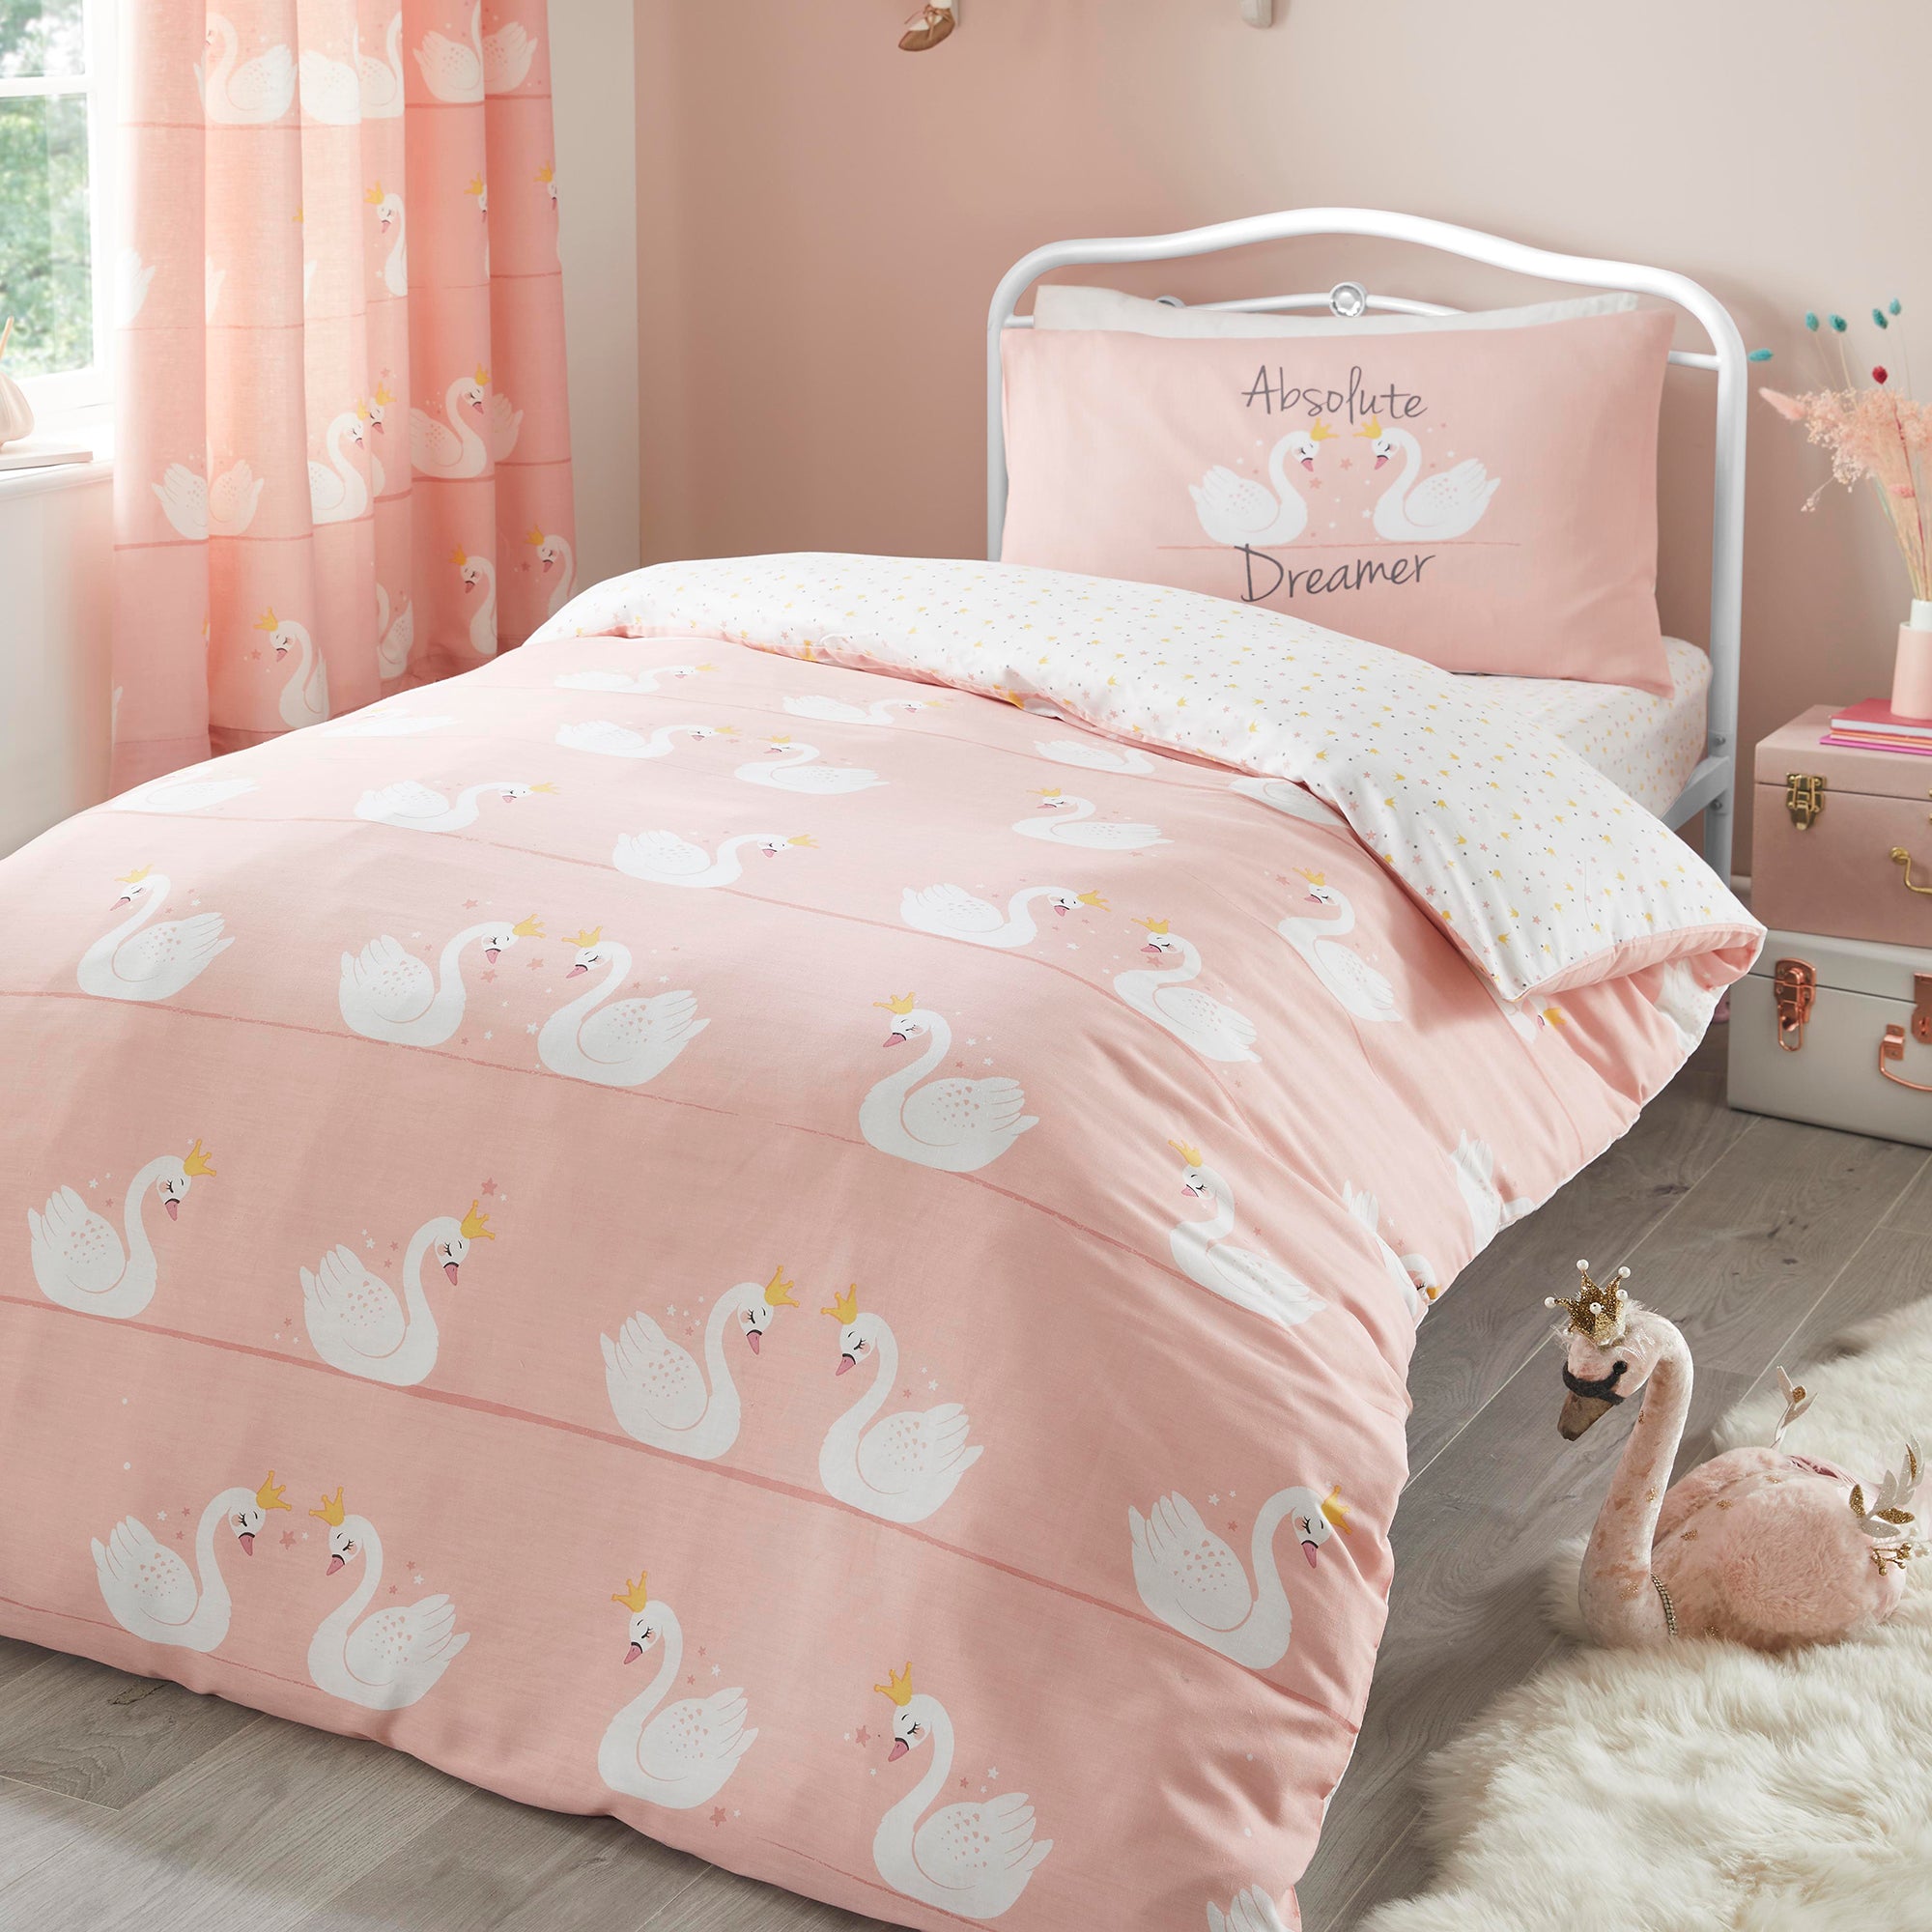 Swan - Kids Duvet Cover Set, Curtains & Fitted Sheets in Coral - by Bedlam